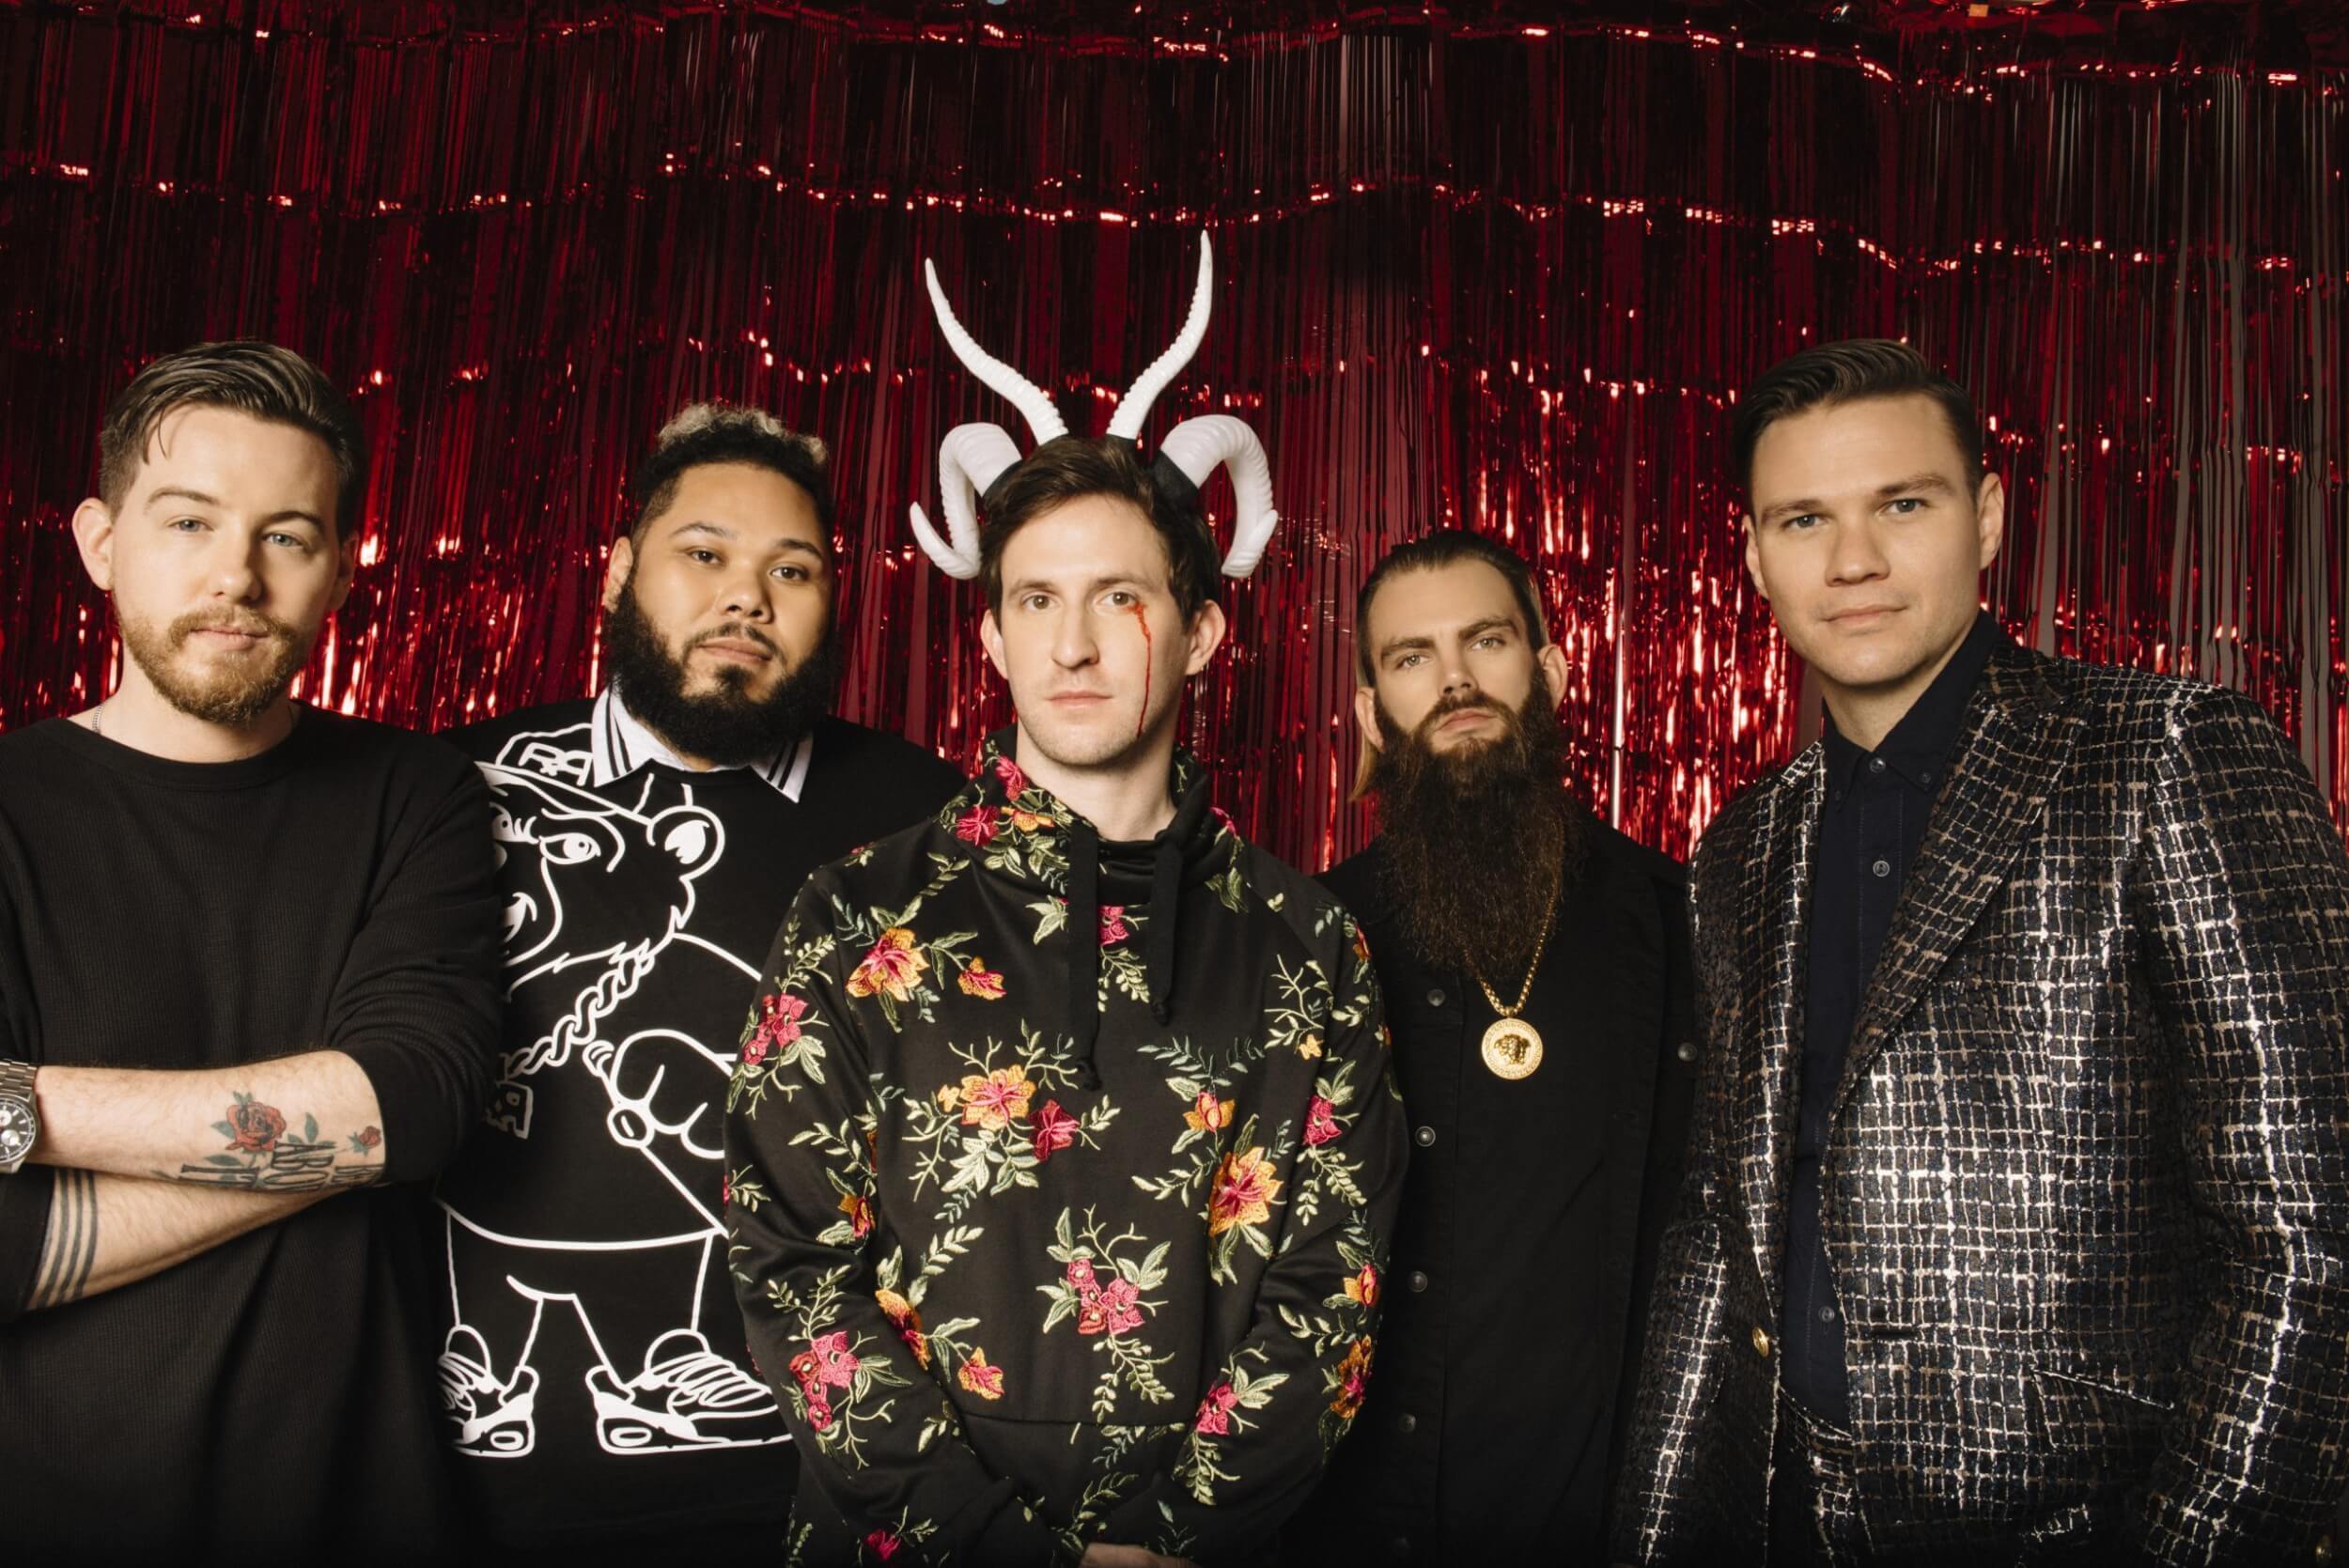 DANCE GAVIN DANCE PREMIERE ANIMATED MUSIC VIDEO FOR “ONE IN A MILLION”